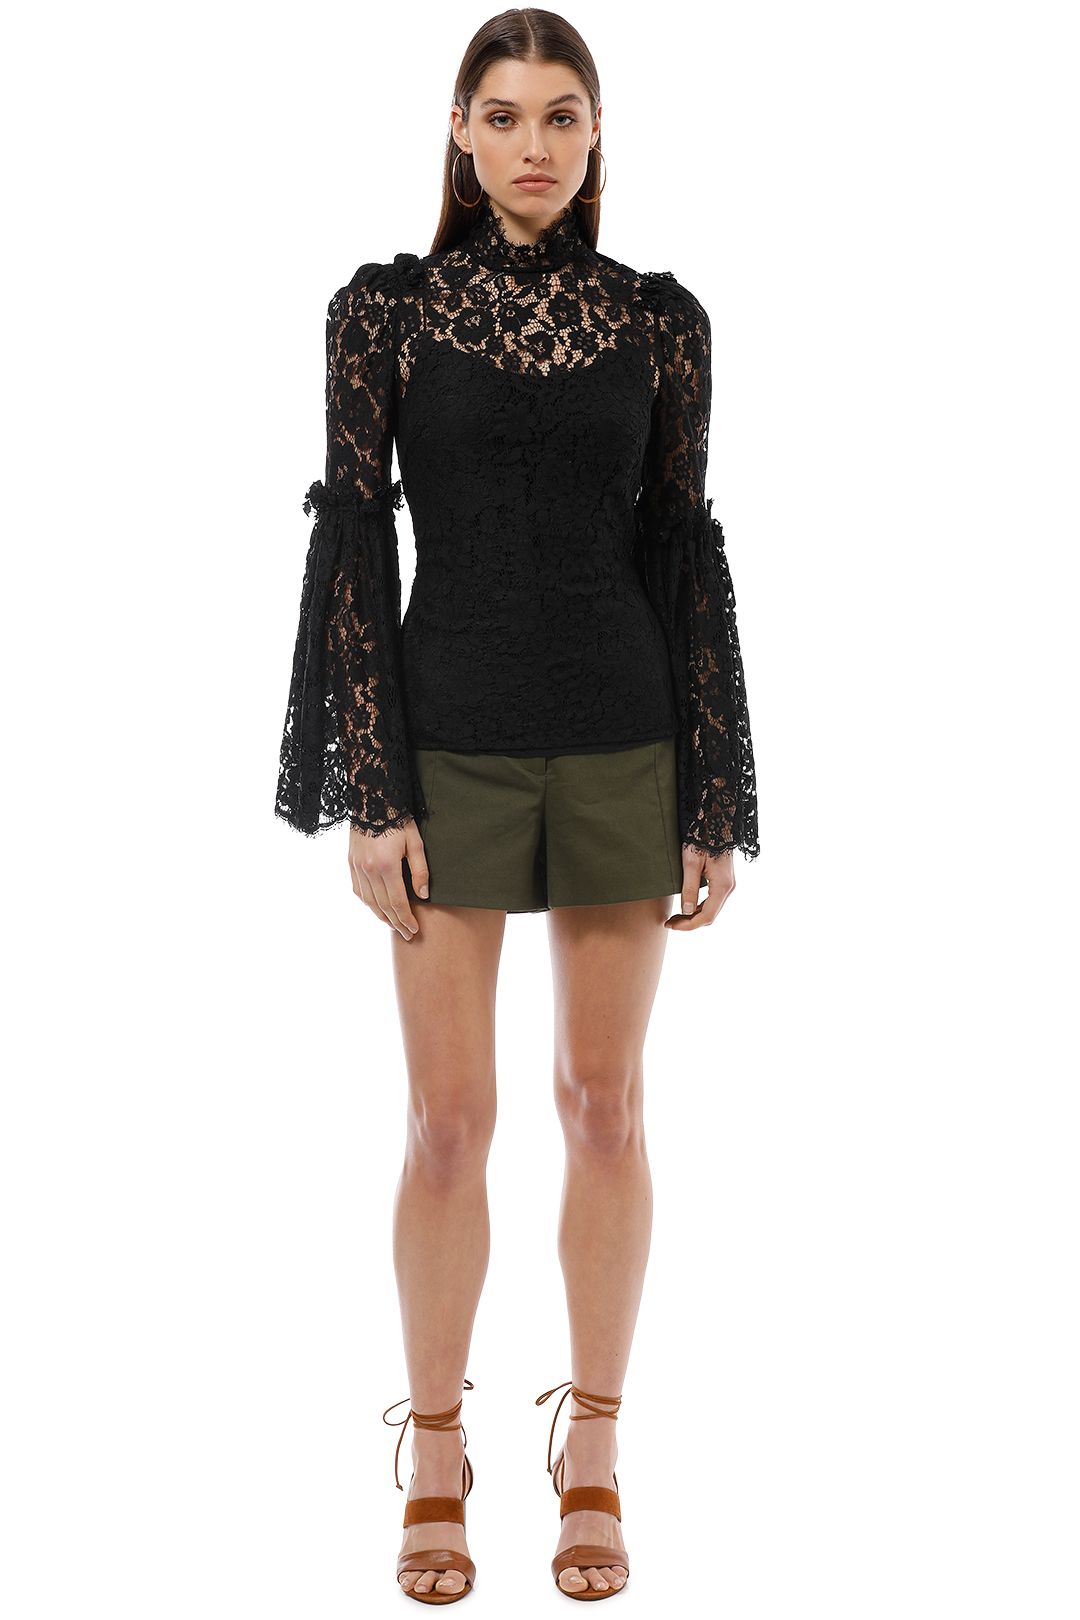 Camilla and Marc - Clemence Top - Black - Front